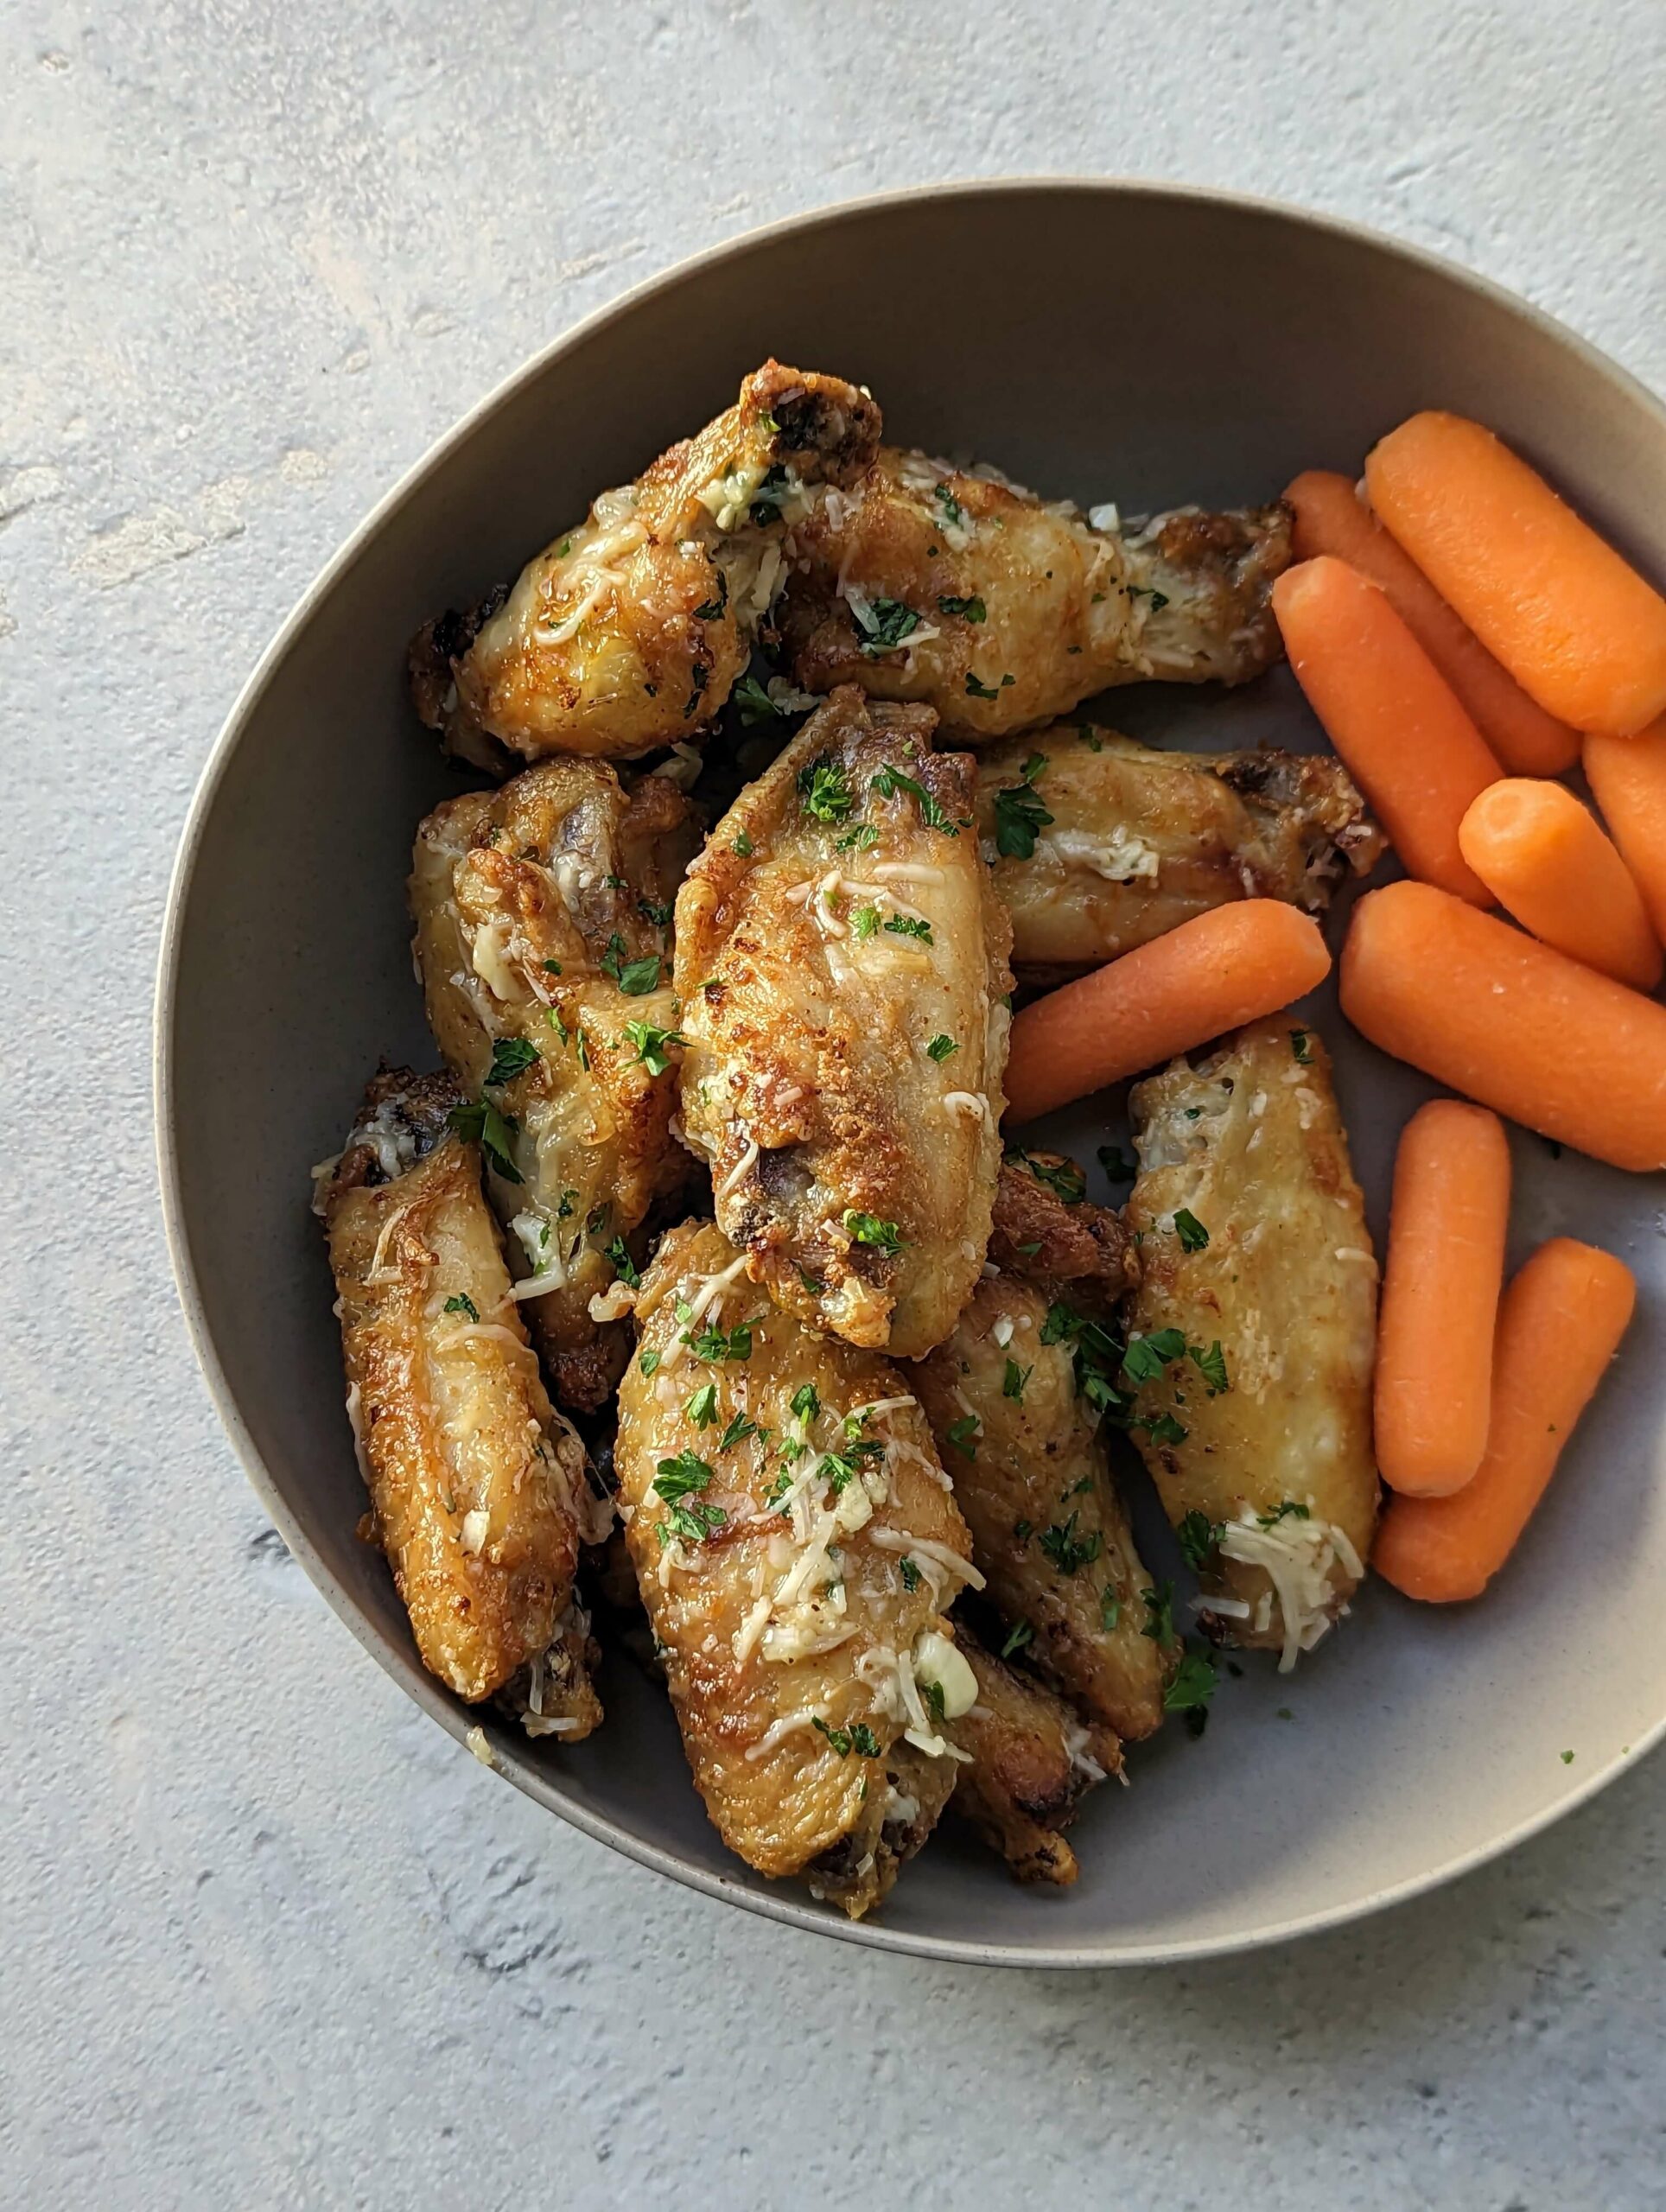 Garlic Parmesan Wings Air Fryer Recipe on a plate with carrots.